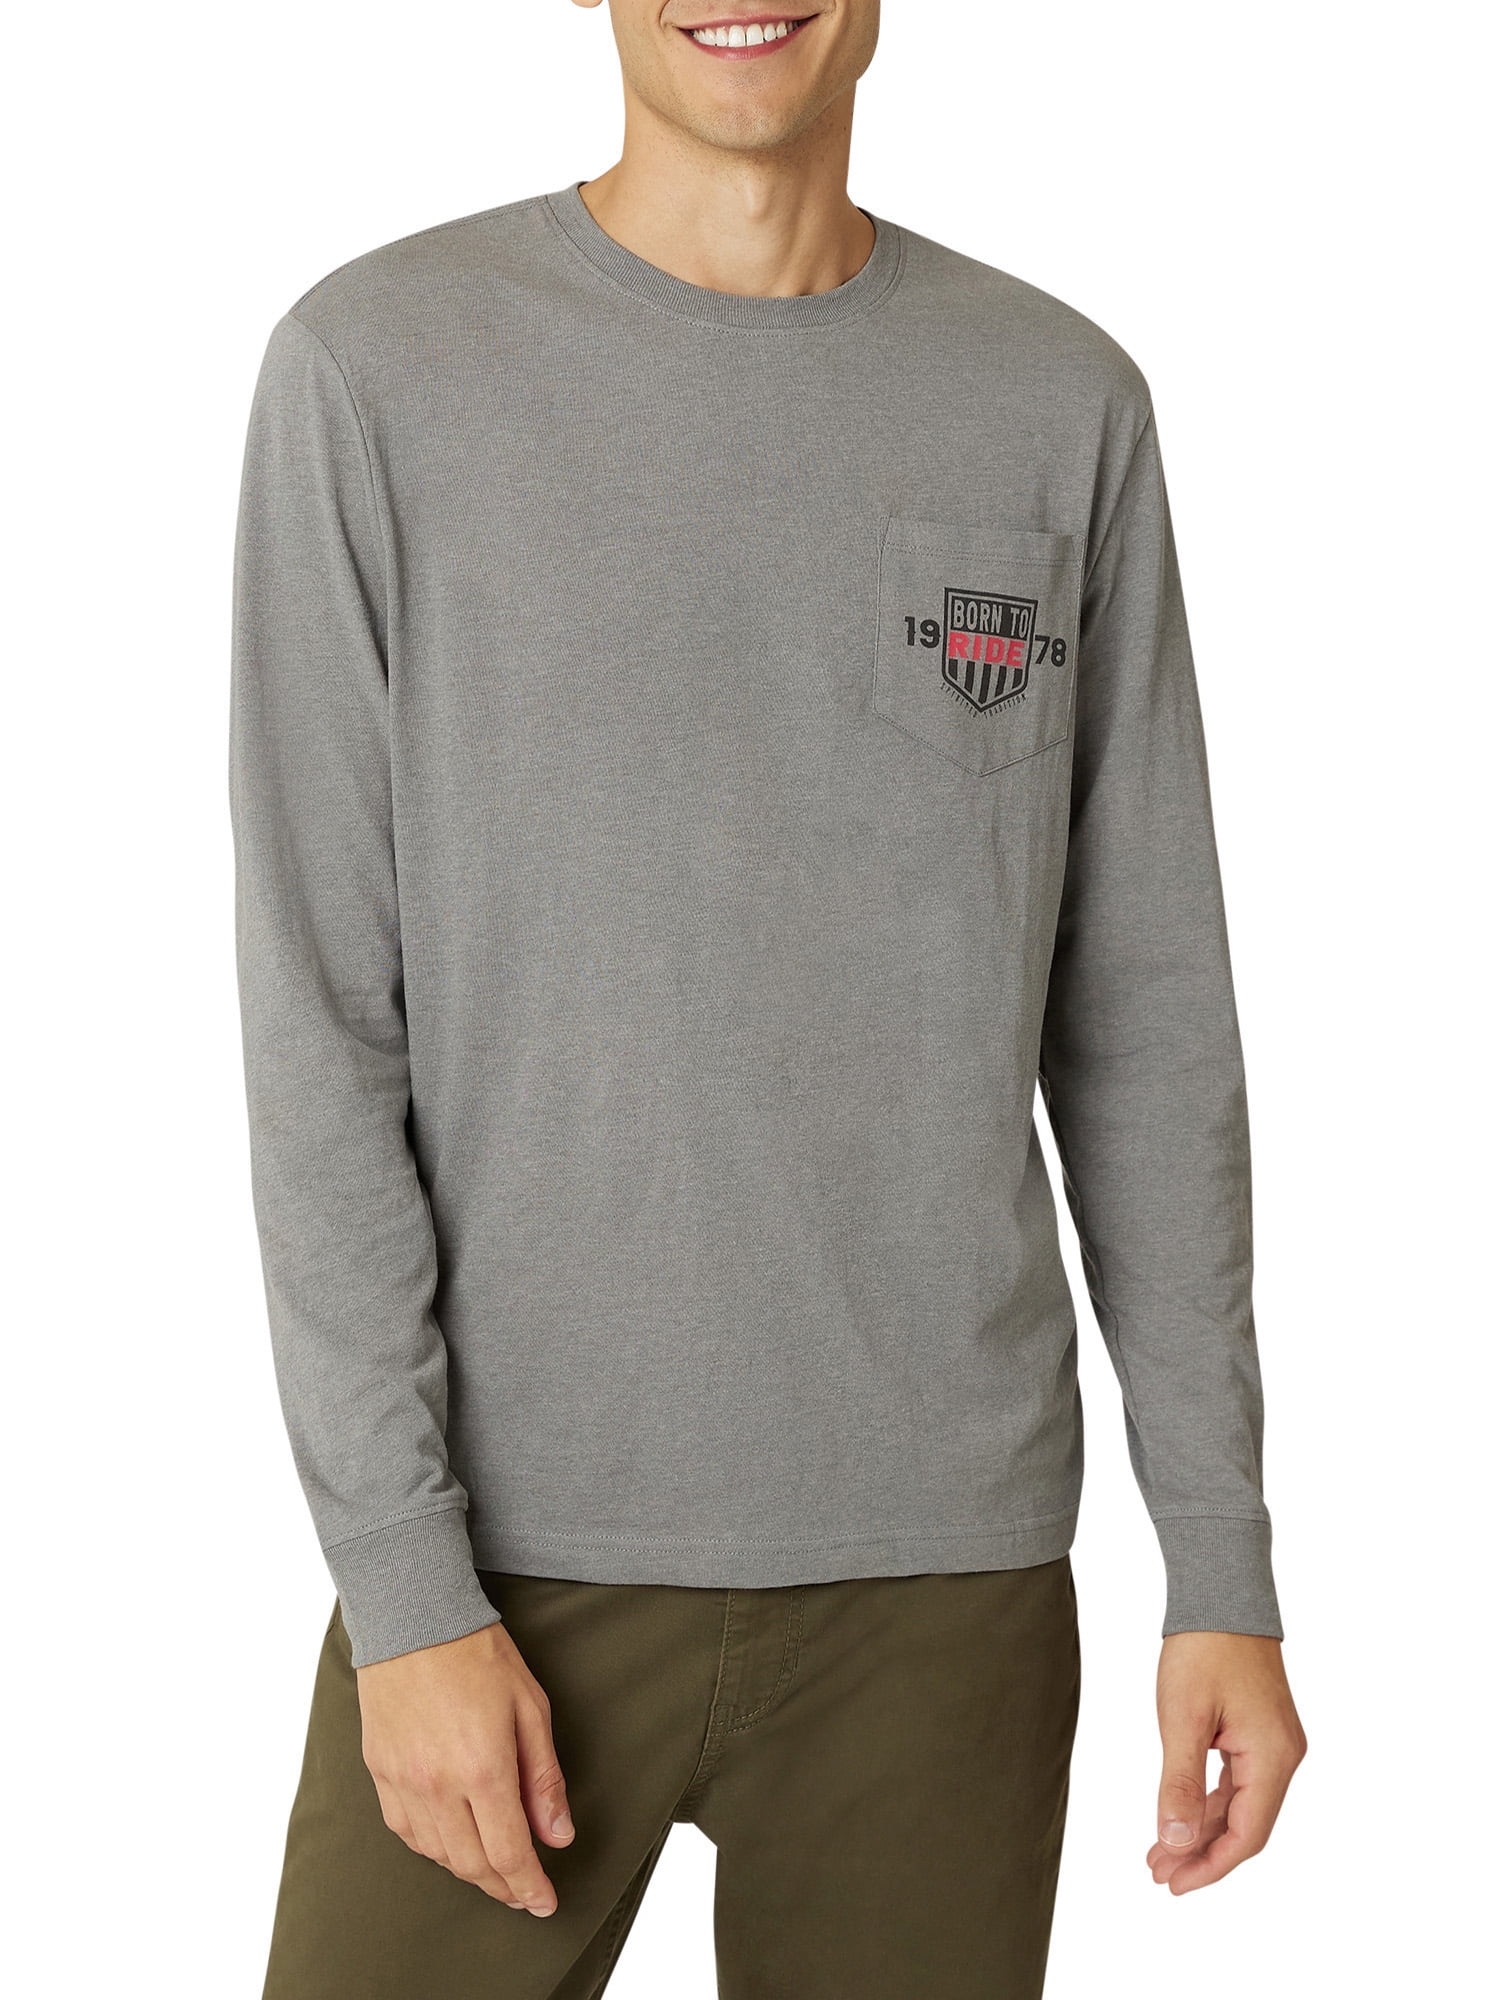 Chaps Men's Long Sleeve Graphic Tee -Sizes XS up to 4XB - Walmart.com